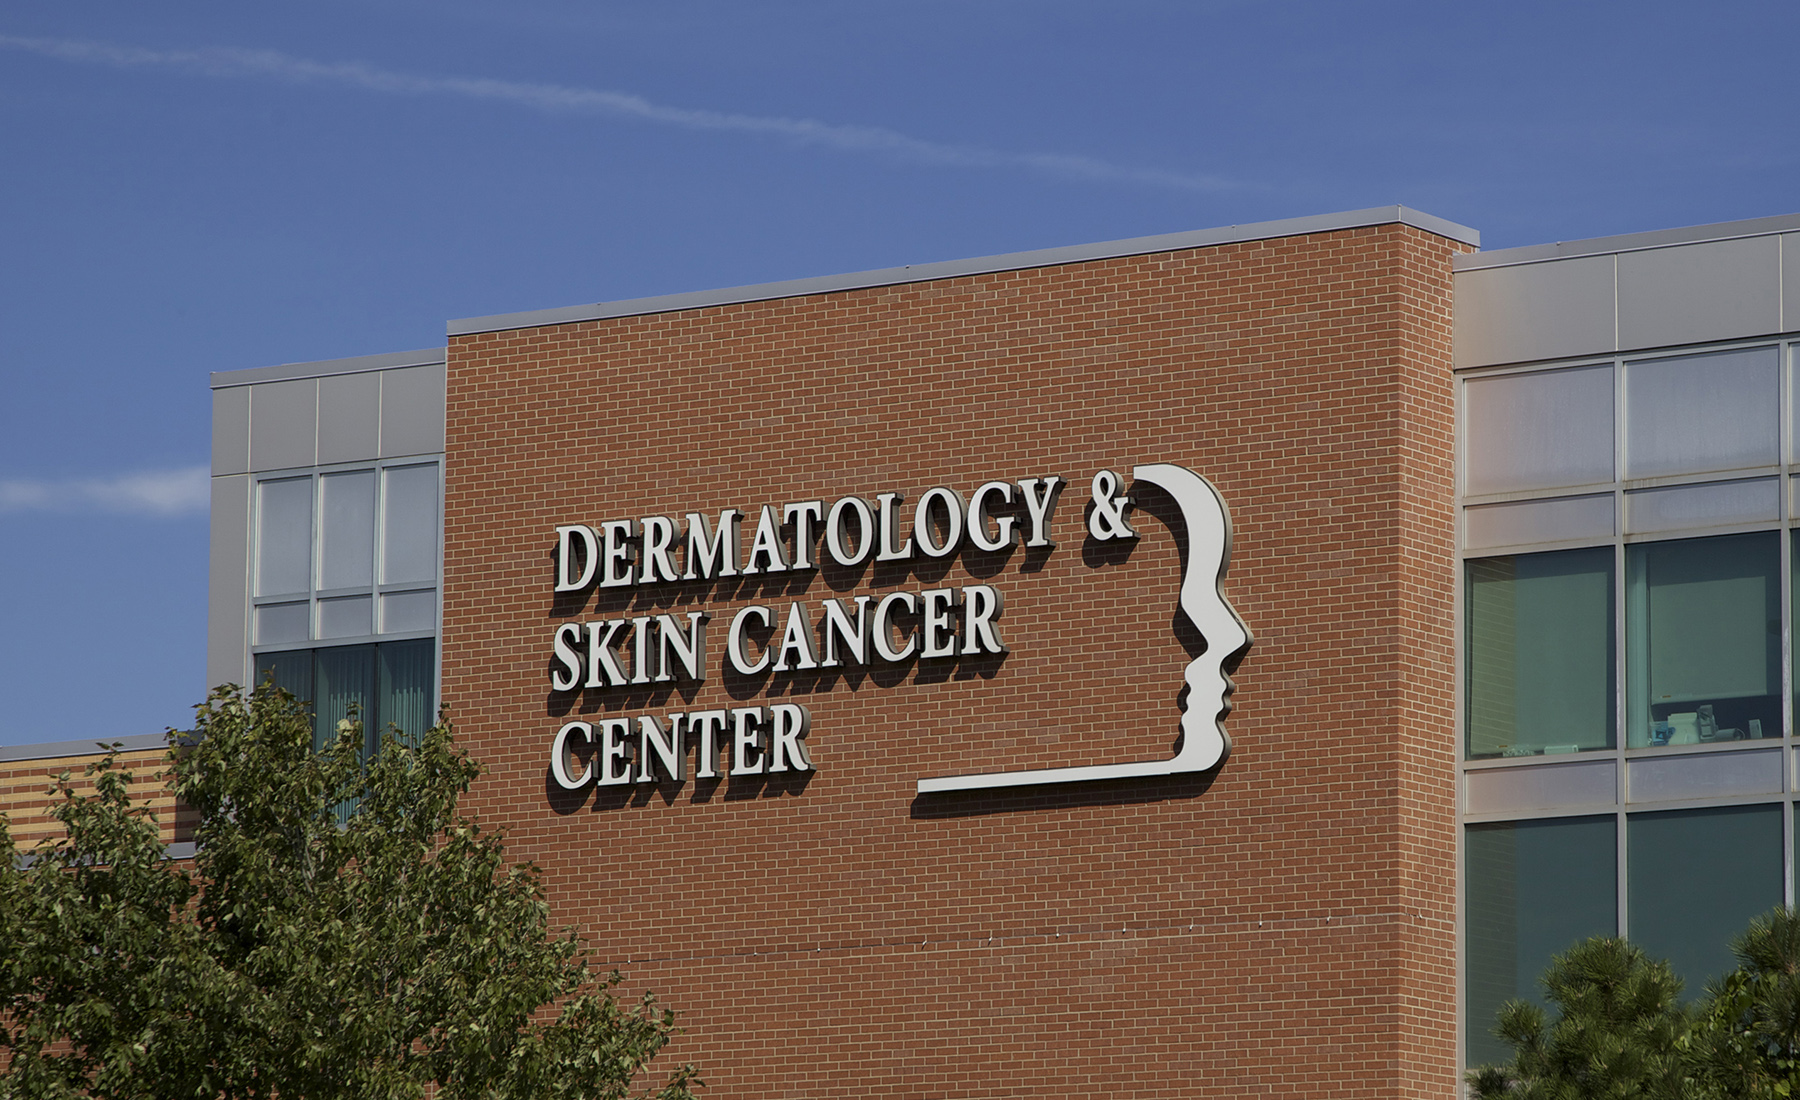 Office of Dermatology & Skin Cancer Centers